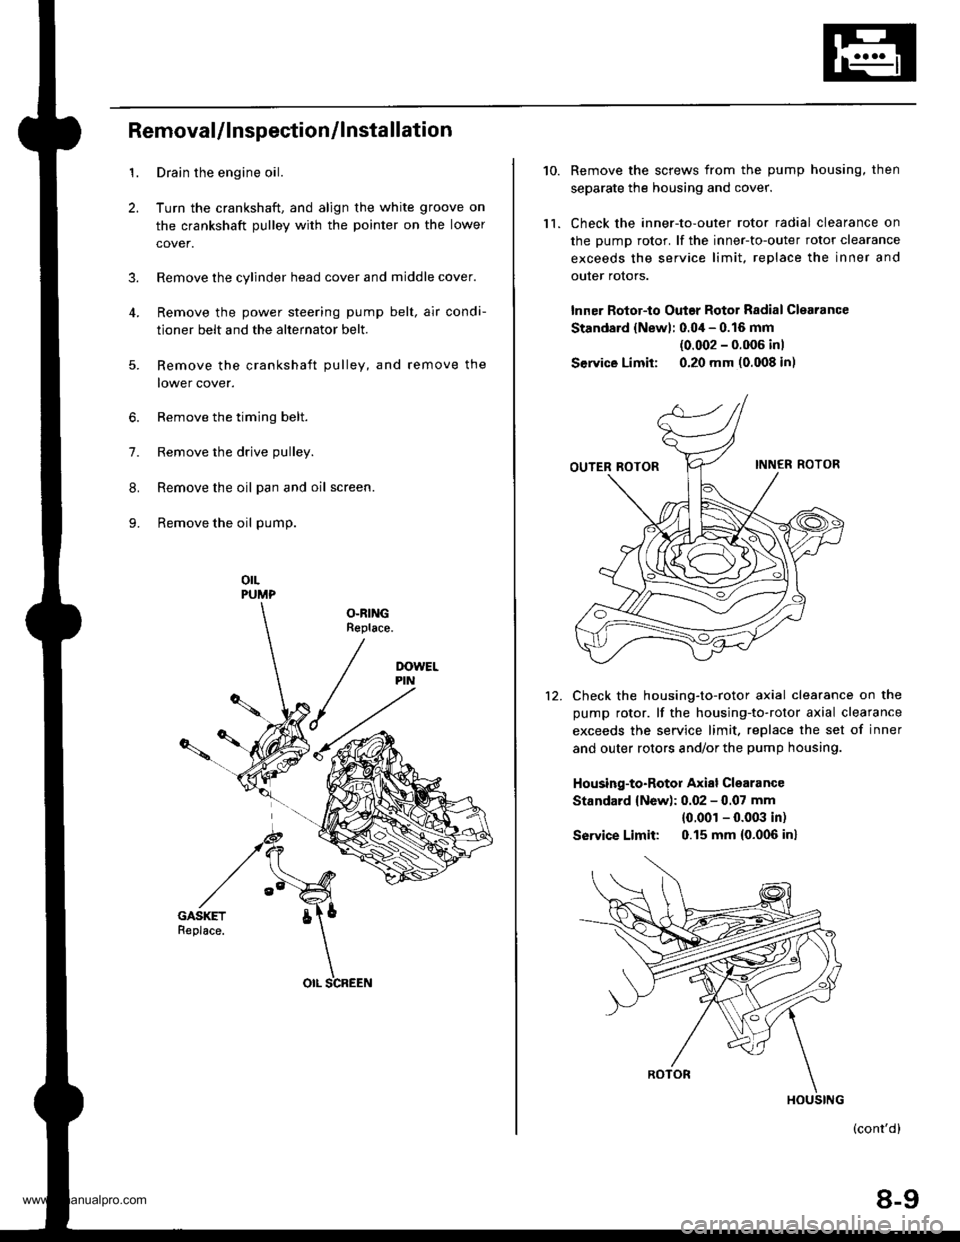 HONDA CR-V 1997 RD1-RD3 / 1.G Owners Manual 
1.
2.
3.
RemovaUlnspection/lnstallation
Drain the engine oil.
Turn the crankshaft, and align the white groove on
the crankshaft pulley with the pointer on the lower
cover.
Remove the cylinder head co